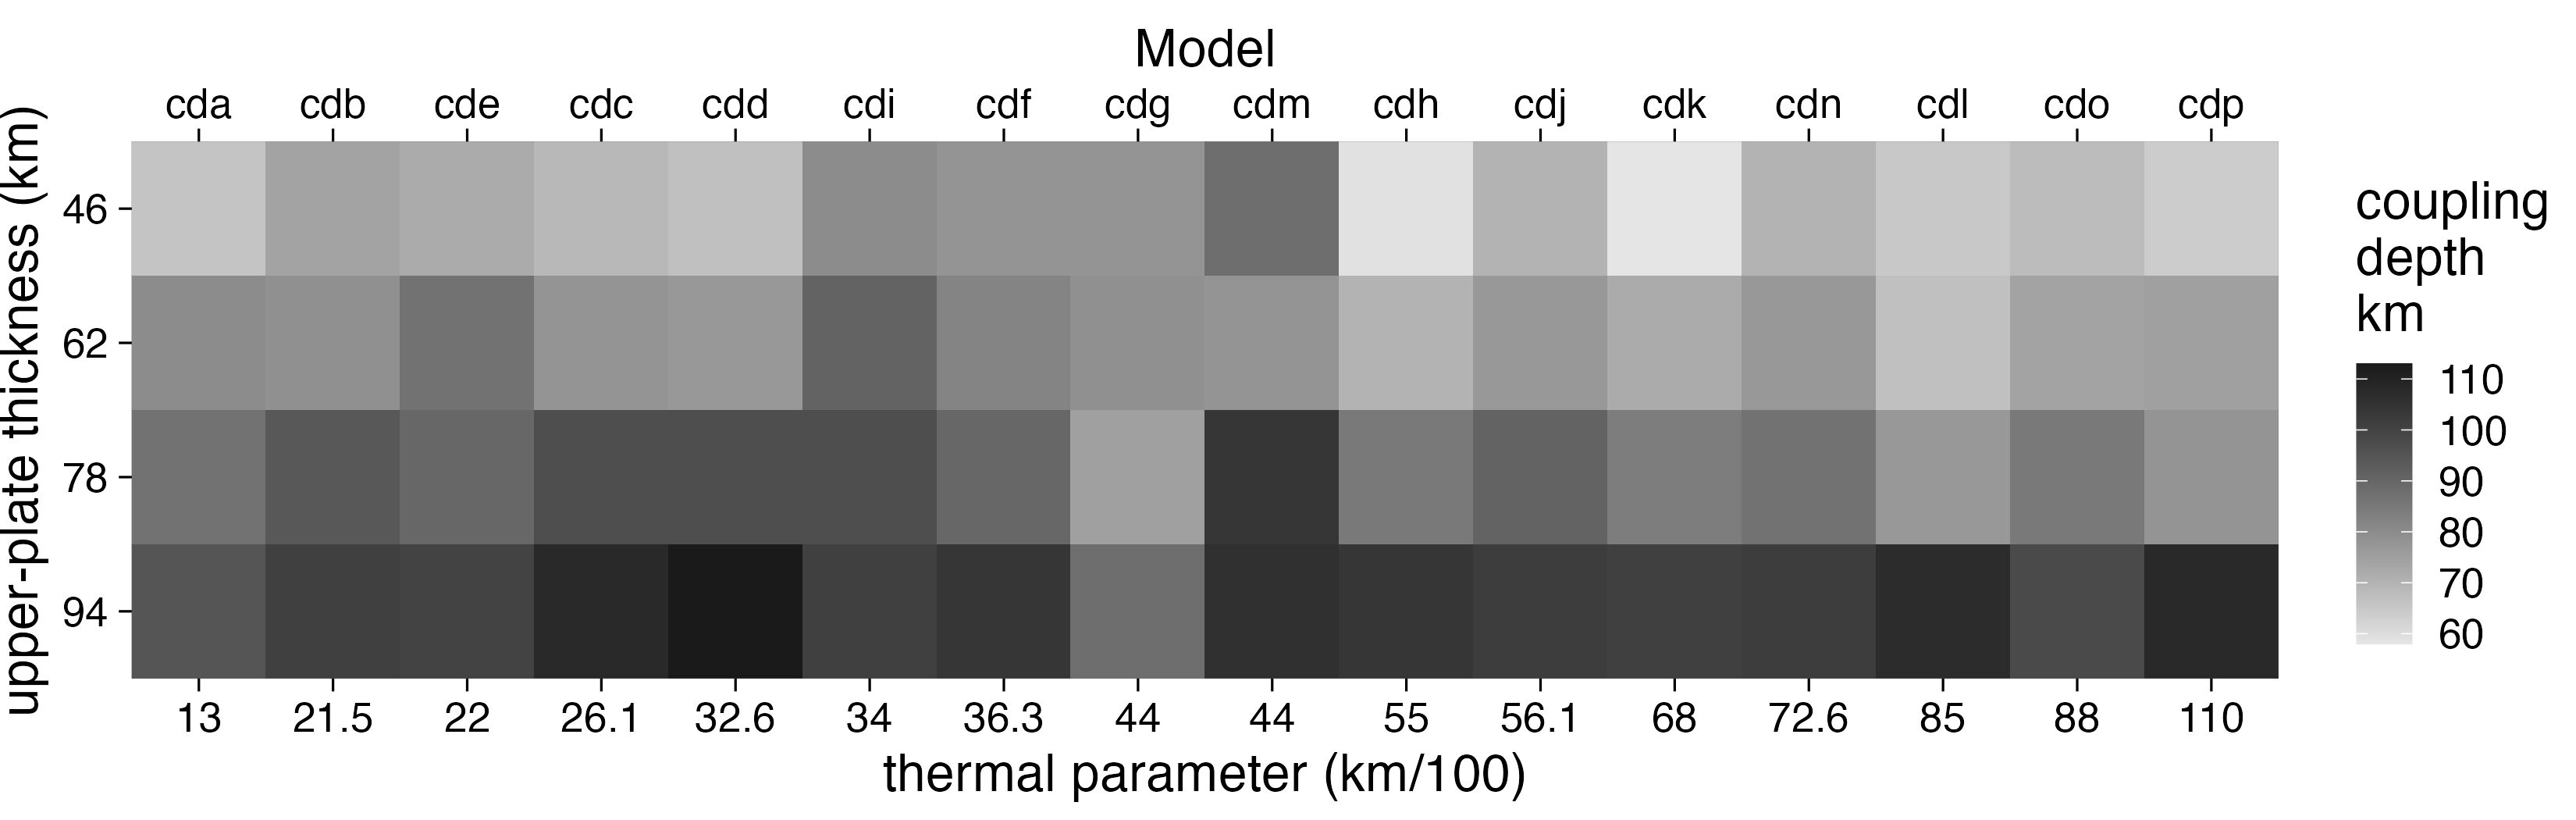 Coupling depths ($Z_{cpl}$, grayscale) determined from numerical experiments. Model names are listed along the top axis and correspond to the range of thermal parameter $\Phi$ values along the bottom axis. Note that the ($\Phi$) axis is not linear. $Z_{cpl}$ increases systematically with increasing $Z_{UP}$ (change in grayscale down columns) for all models. Trends in $Z_{cpl}$ with respect to $\Phi$ (change in grayscale across rows) are less apparent.